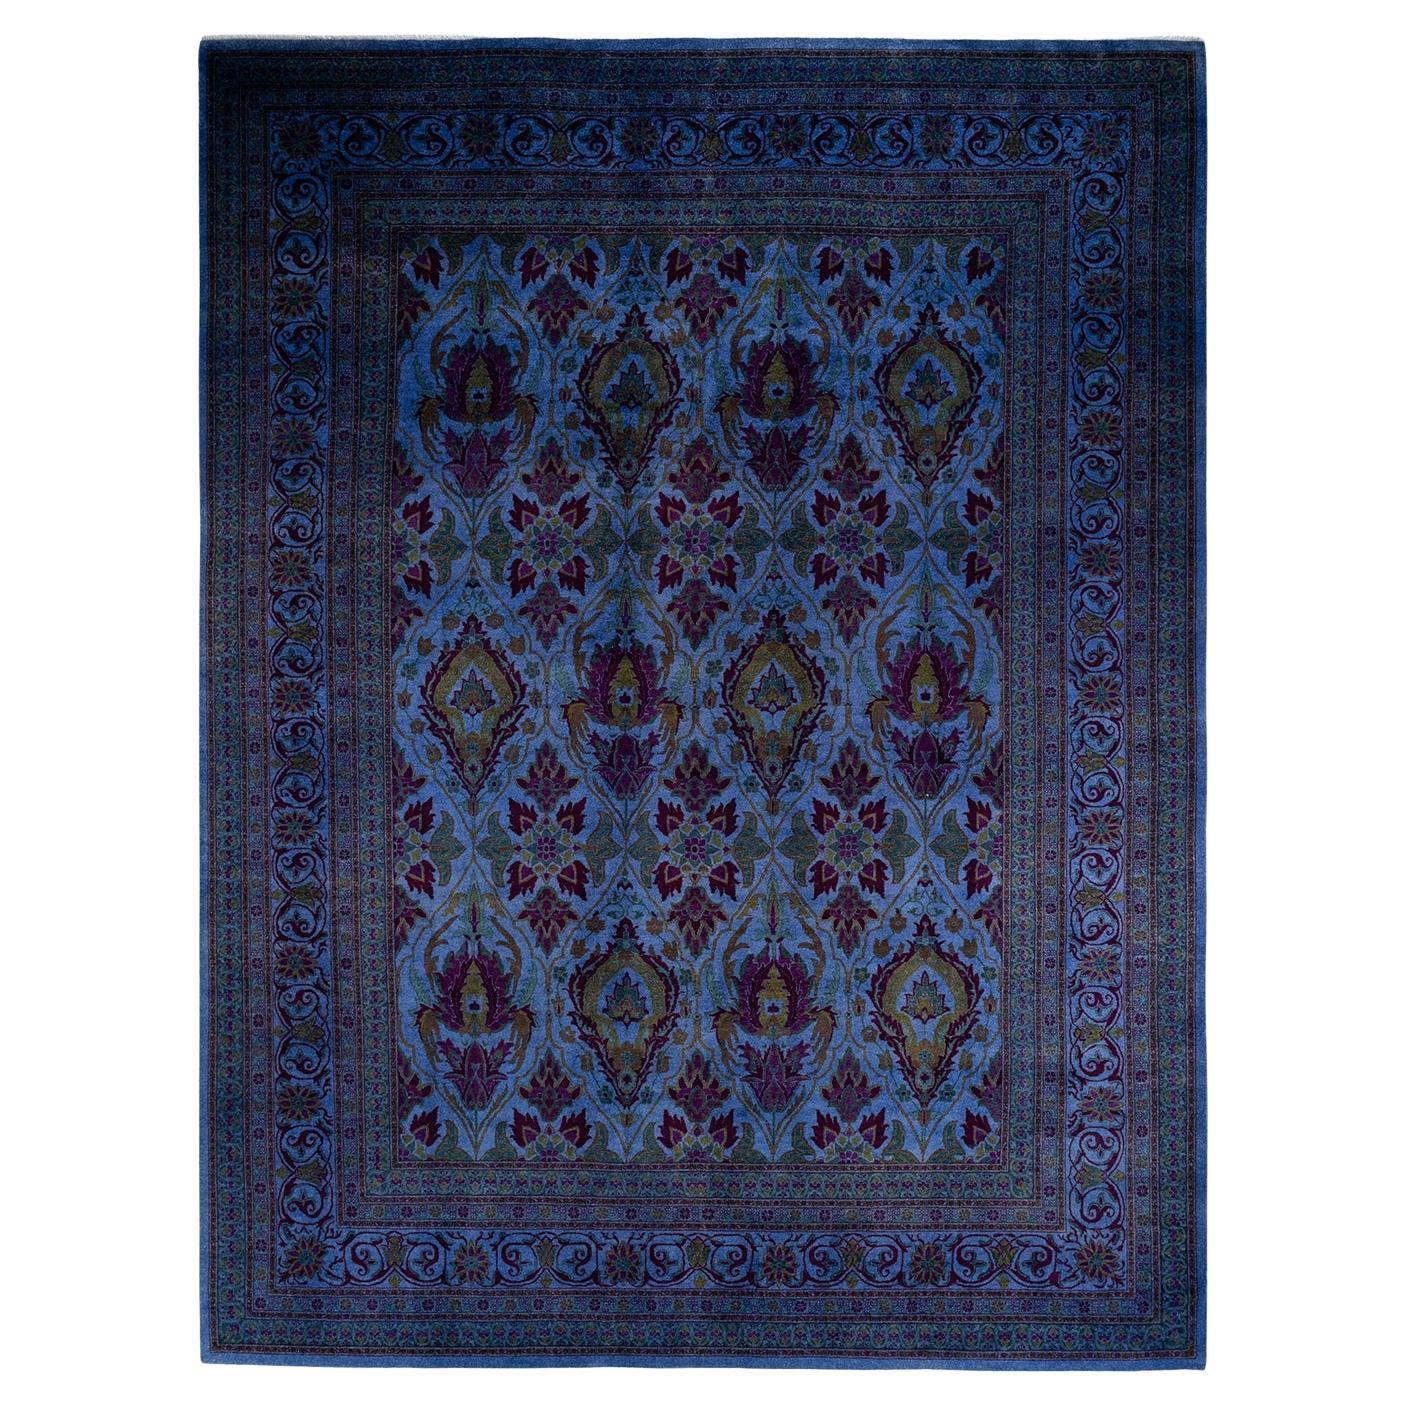 One of a Kind Hand Knotted Contemporary Overdyed Blue Area Rug